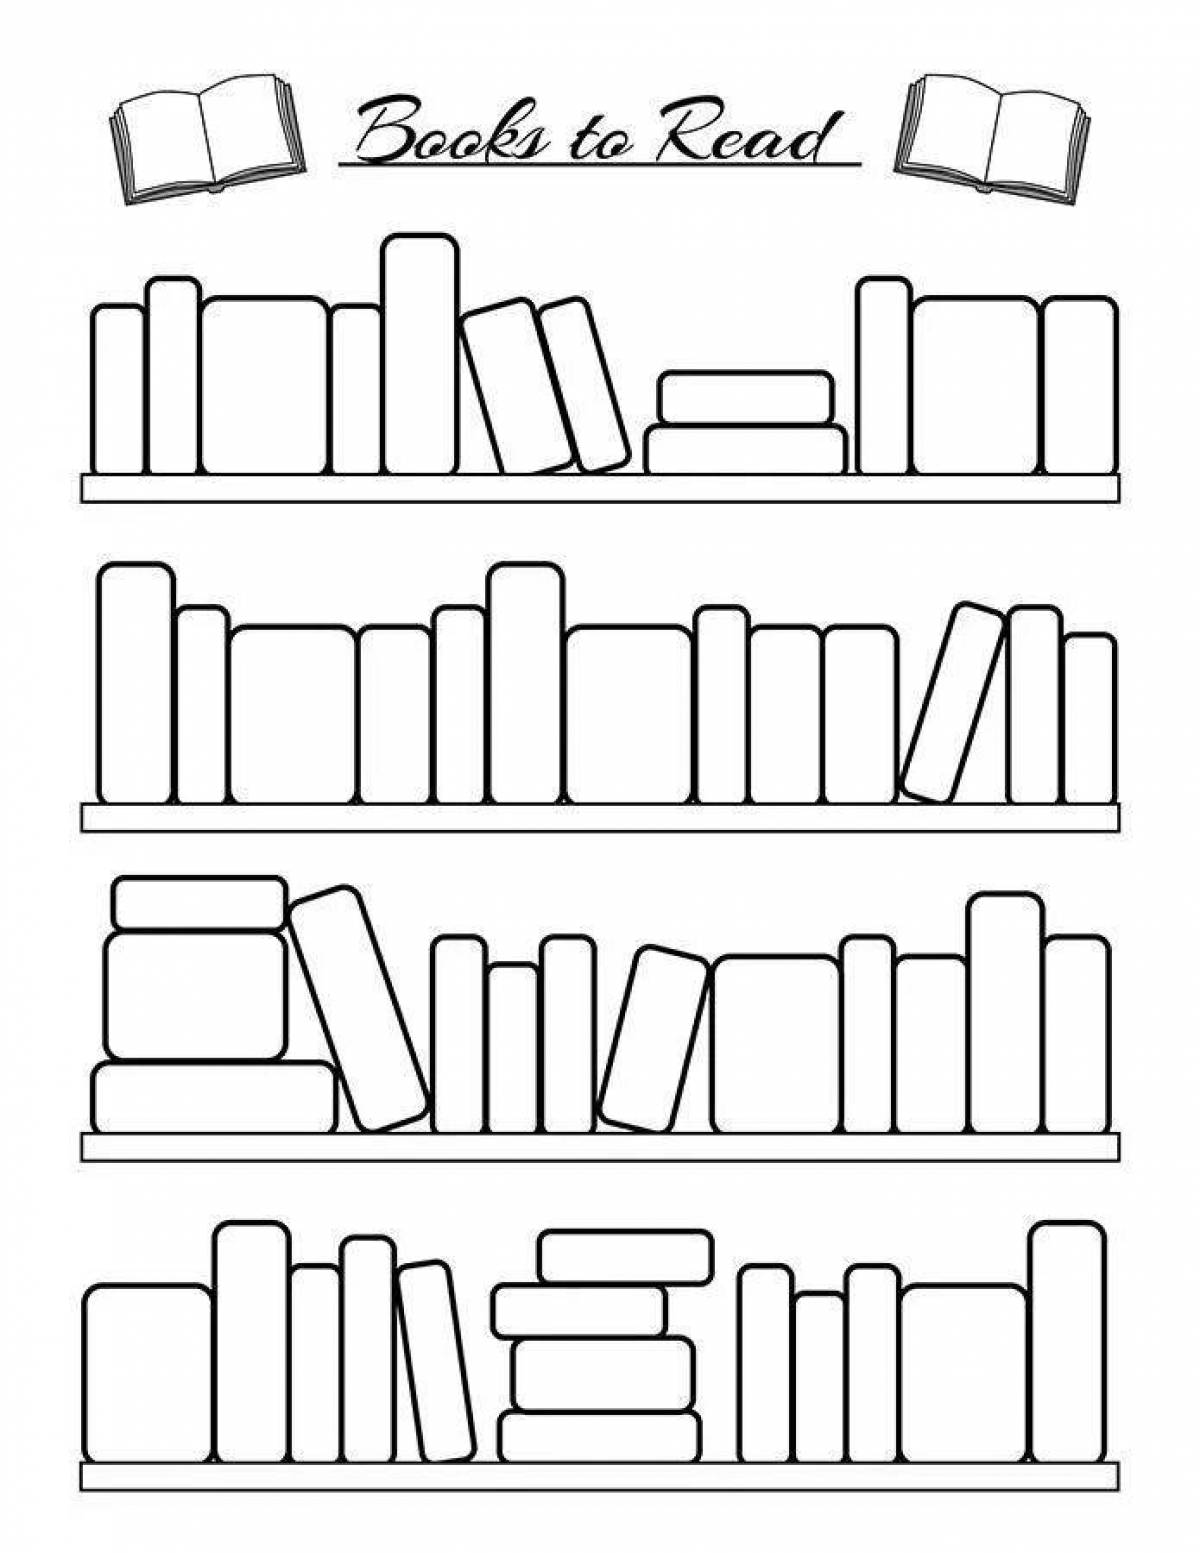 Coloring book shelf with books